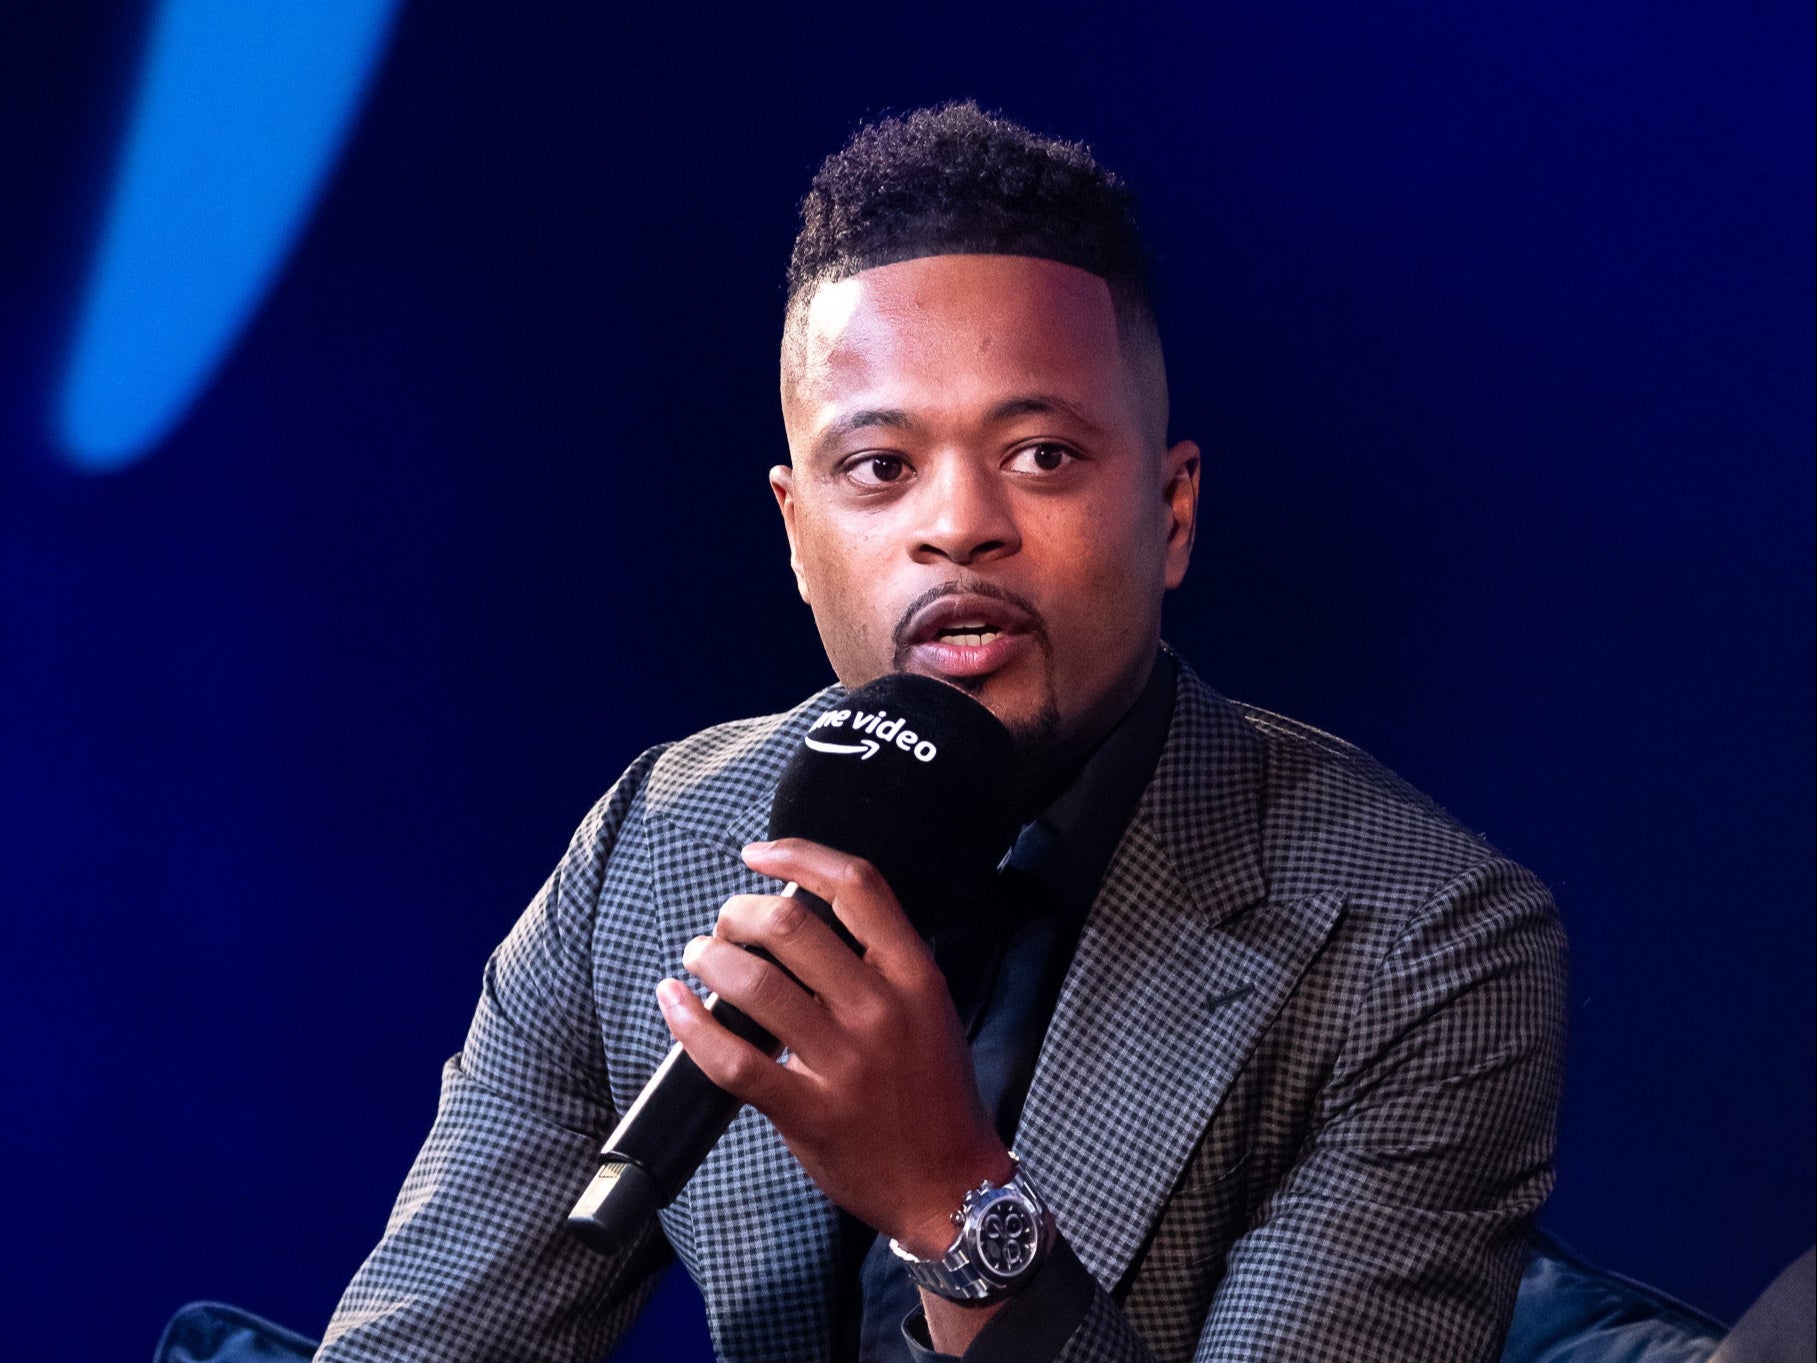 Patrice Evra has revealed the abuse he suffered as a child